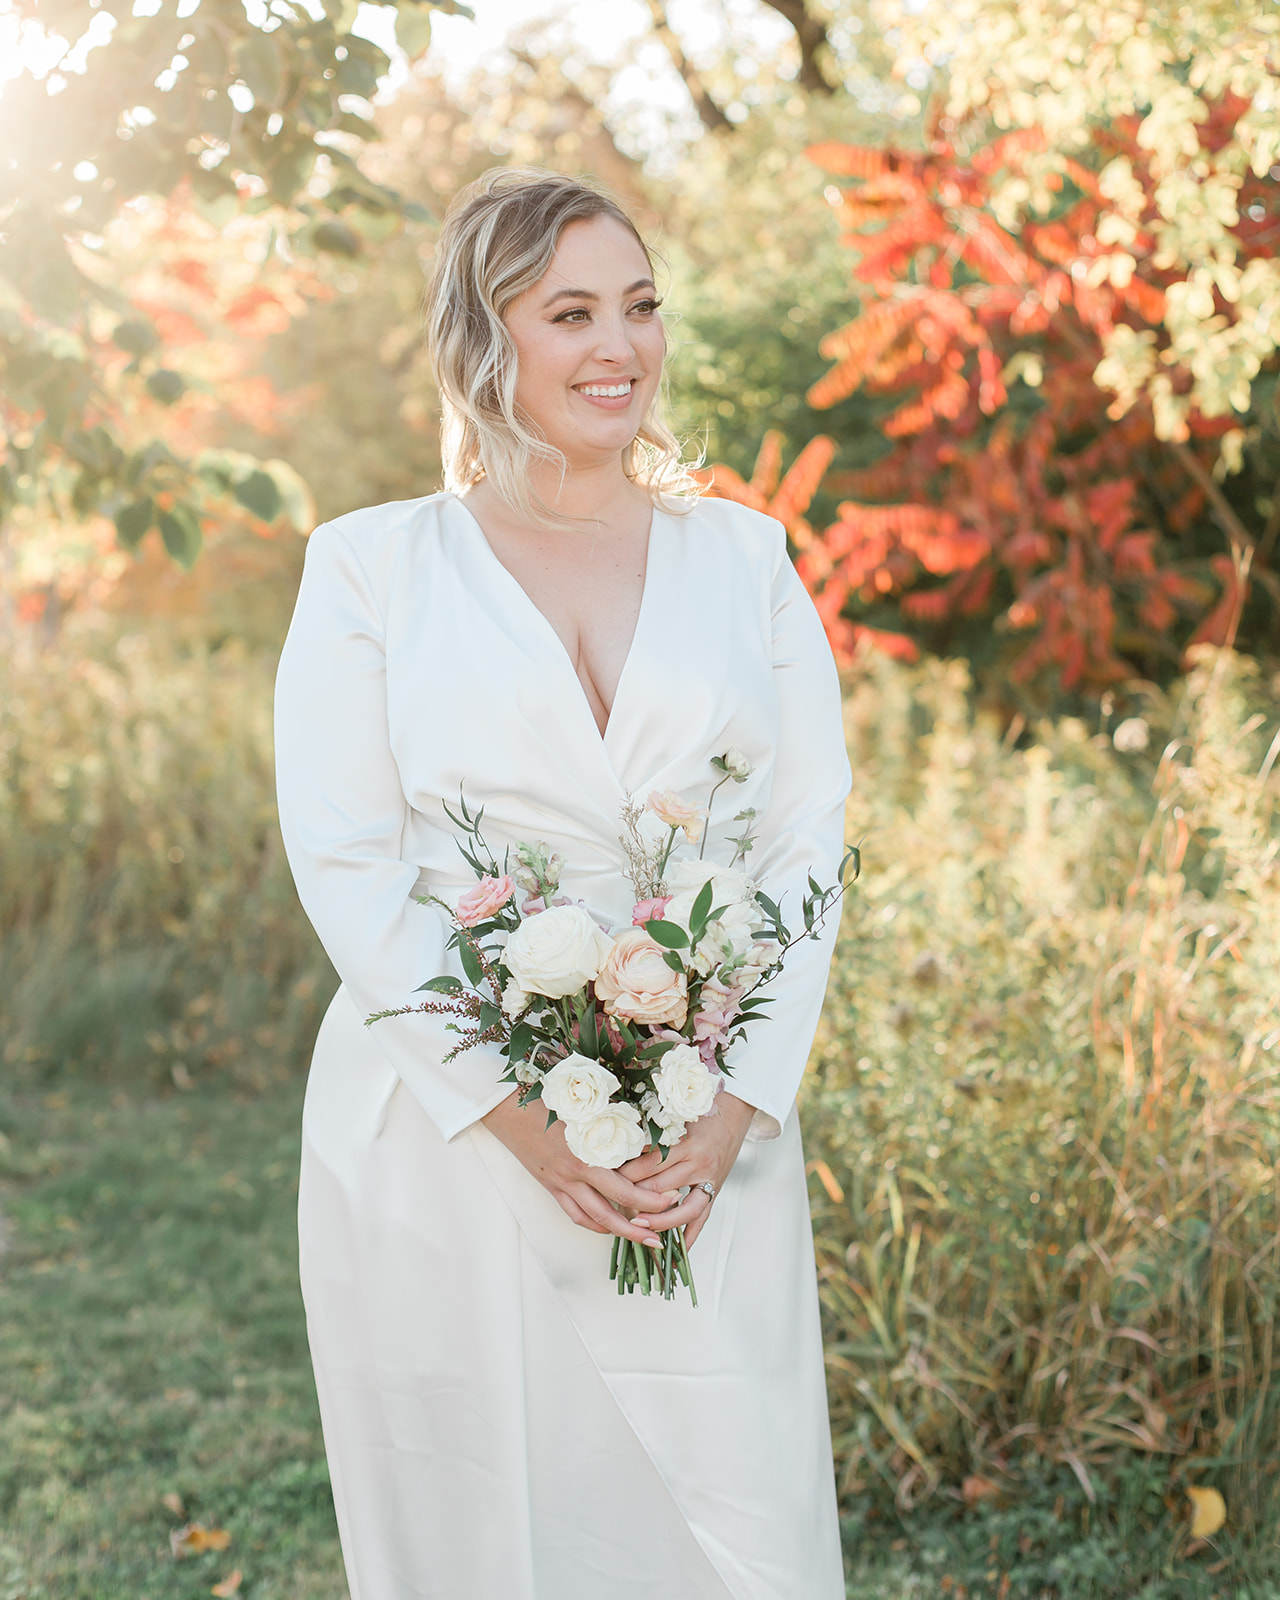 A portrait of a bride holding her bouquet during autumn for her elopement in Ontario